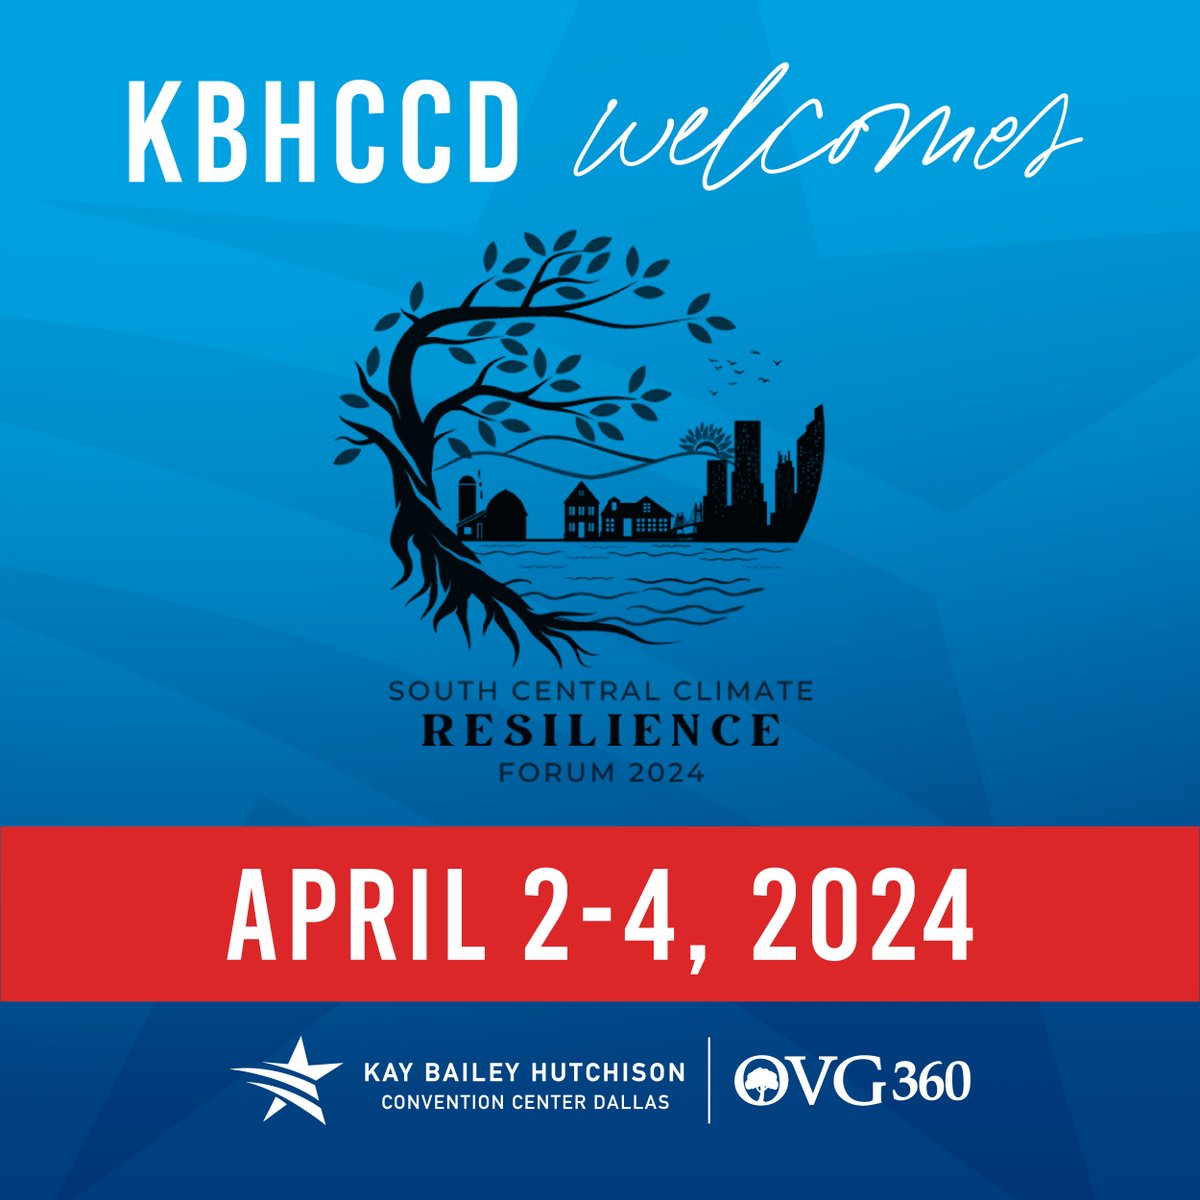 Join us as we welcome the South Central Climate Resilience Forum to #KBHCCD, April 2-4! This 3-day event aims to unite regional thought leaders, increase understanding of climate challenges, and raise awareness of ongoing resilience efforts. 🌎💚 #SCCRF2024 #EarthMonth